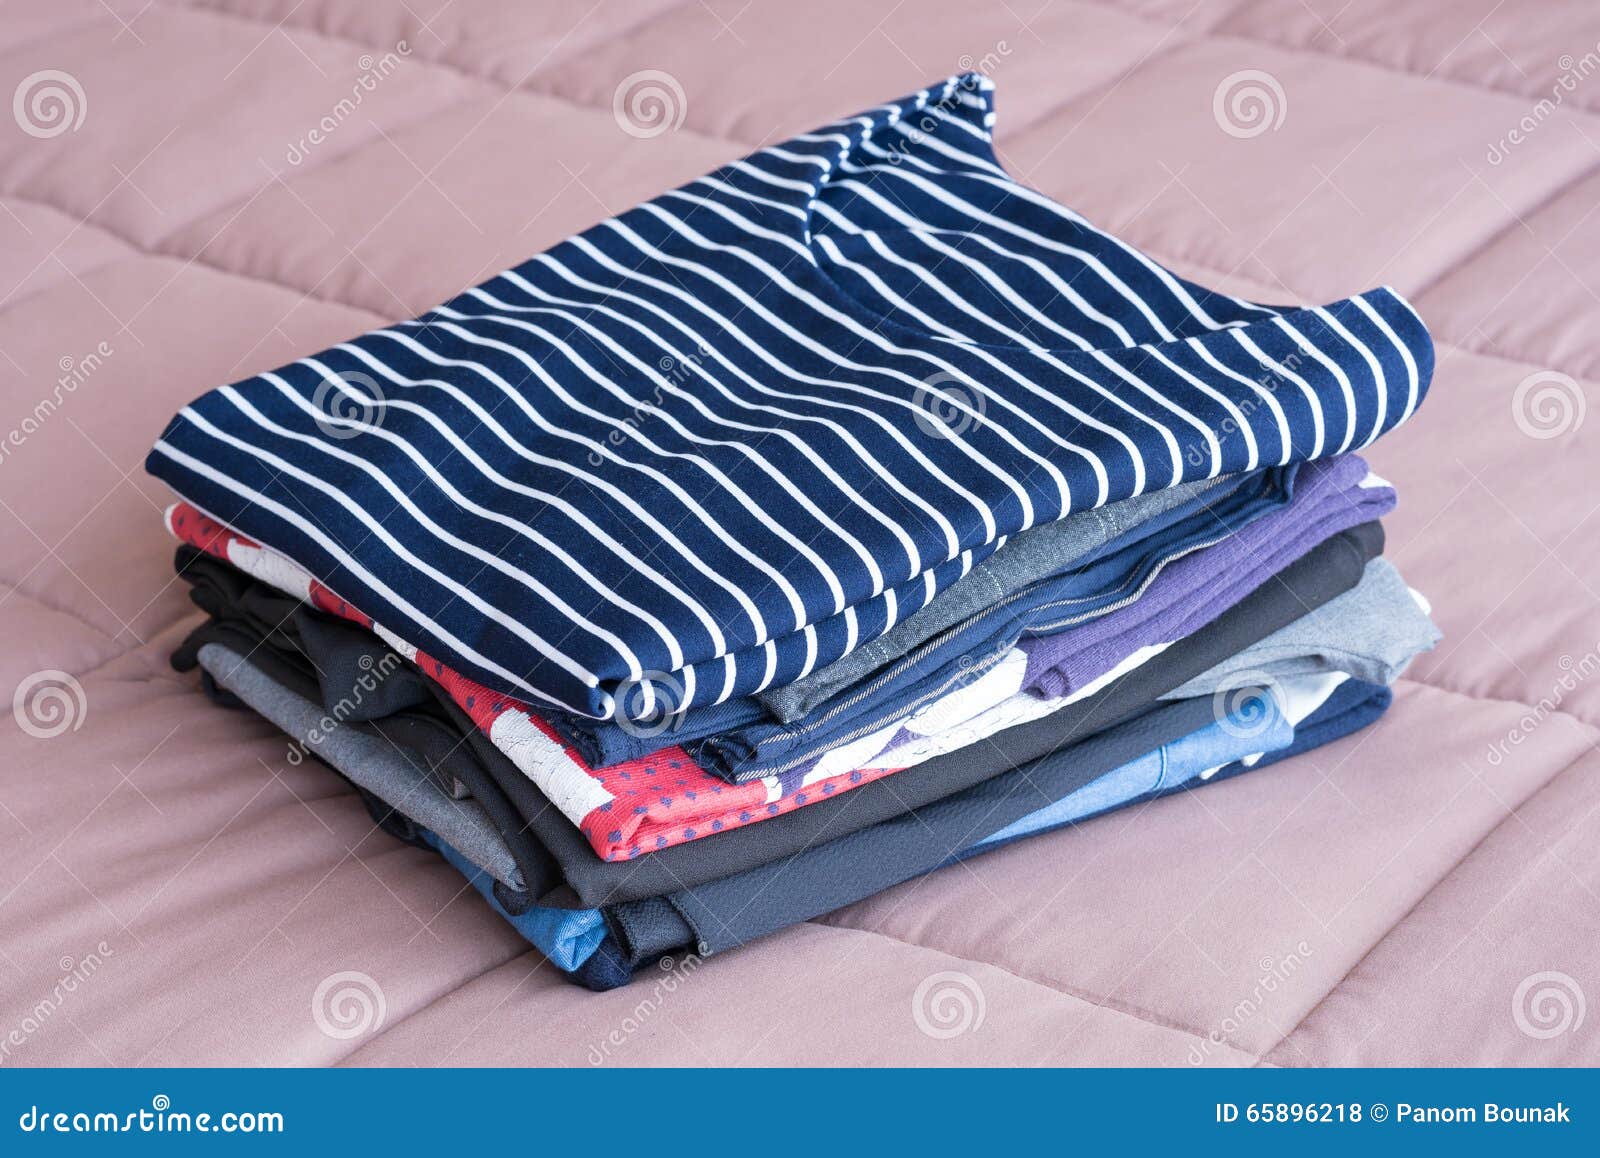 Folding Clothes on the Bed before Keeping in Wardrobe Stock Photo ...